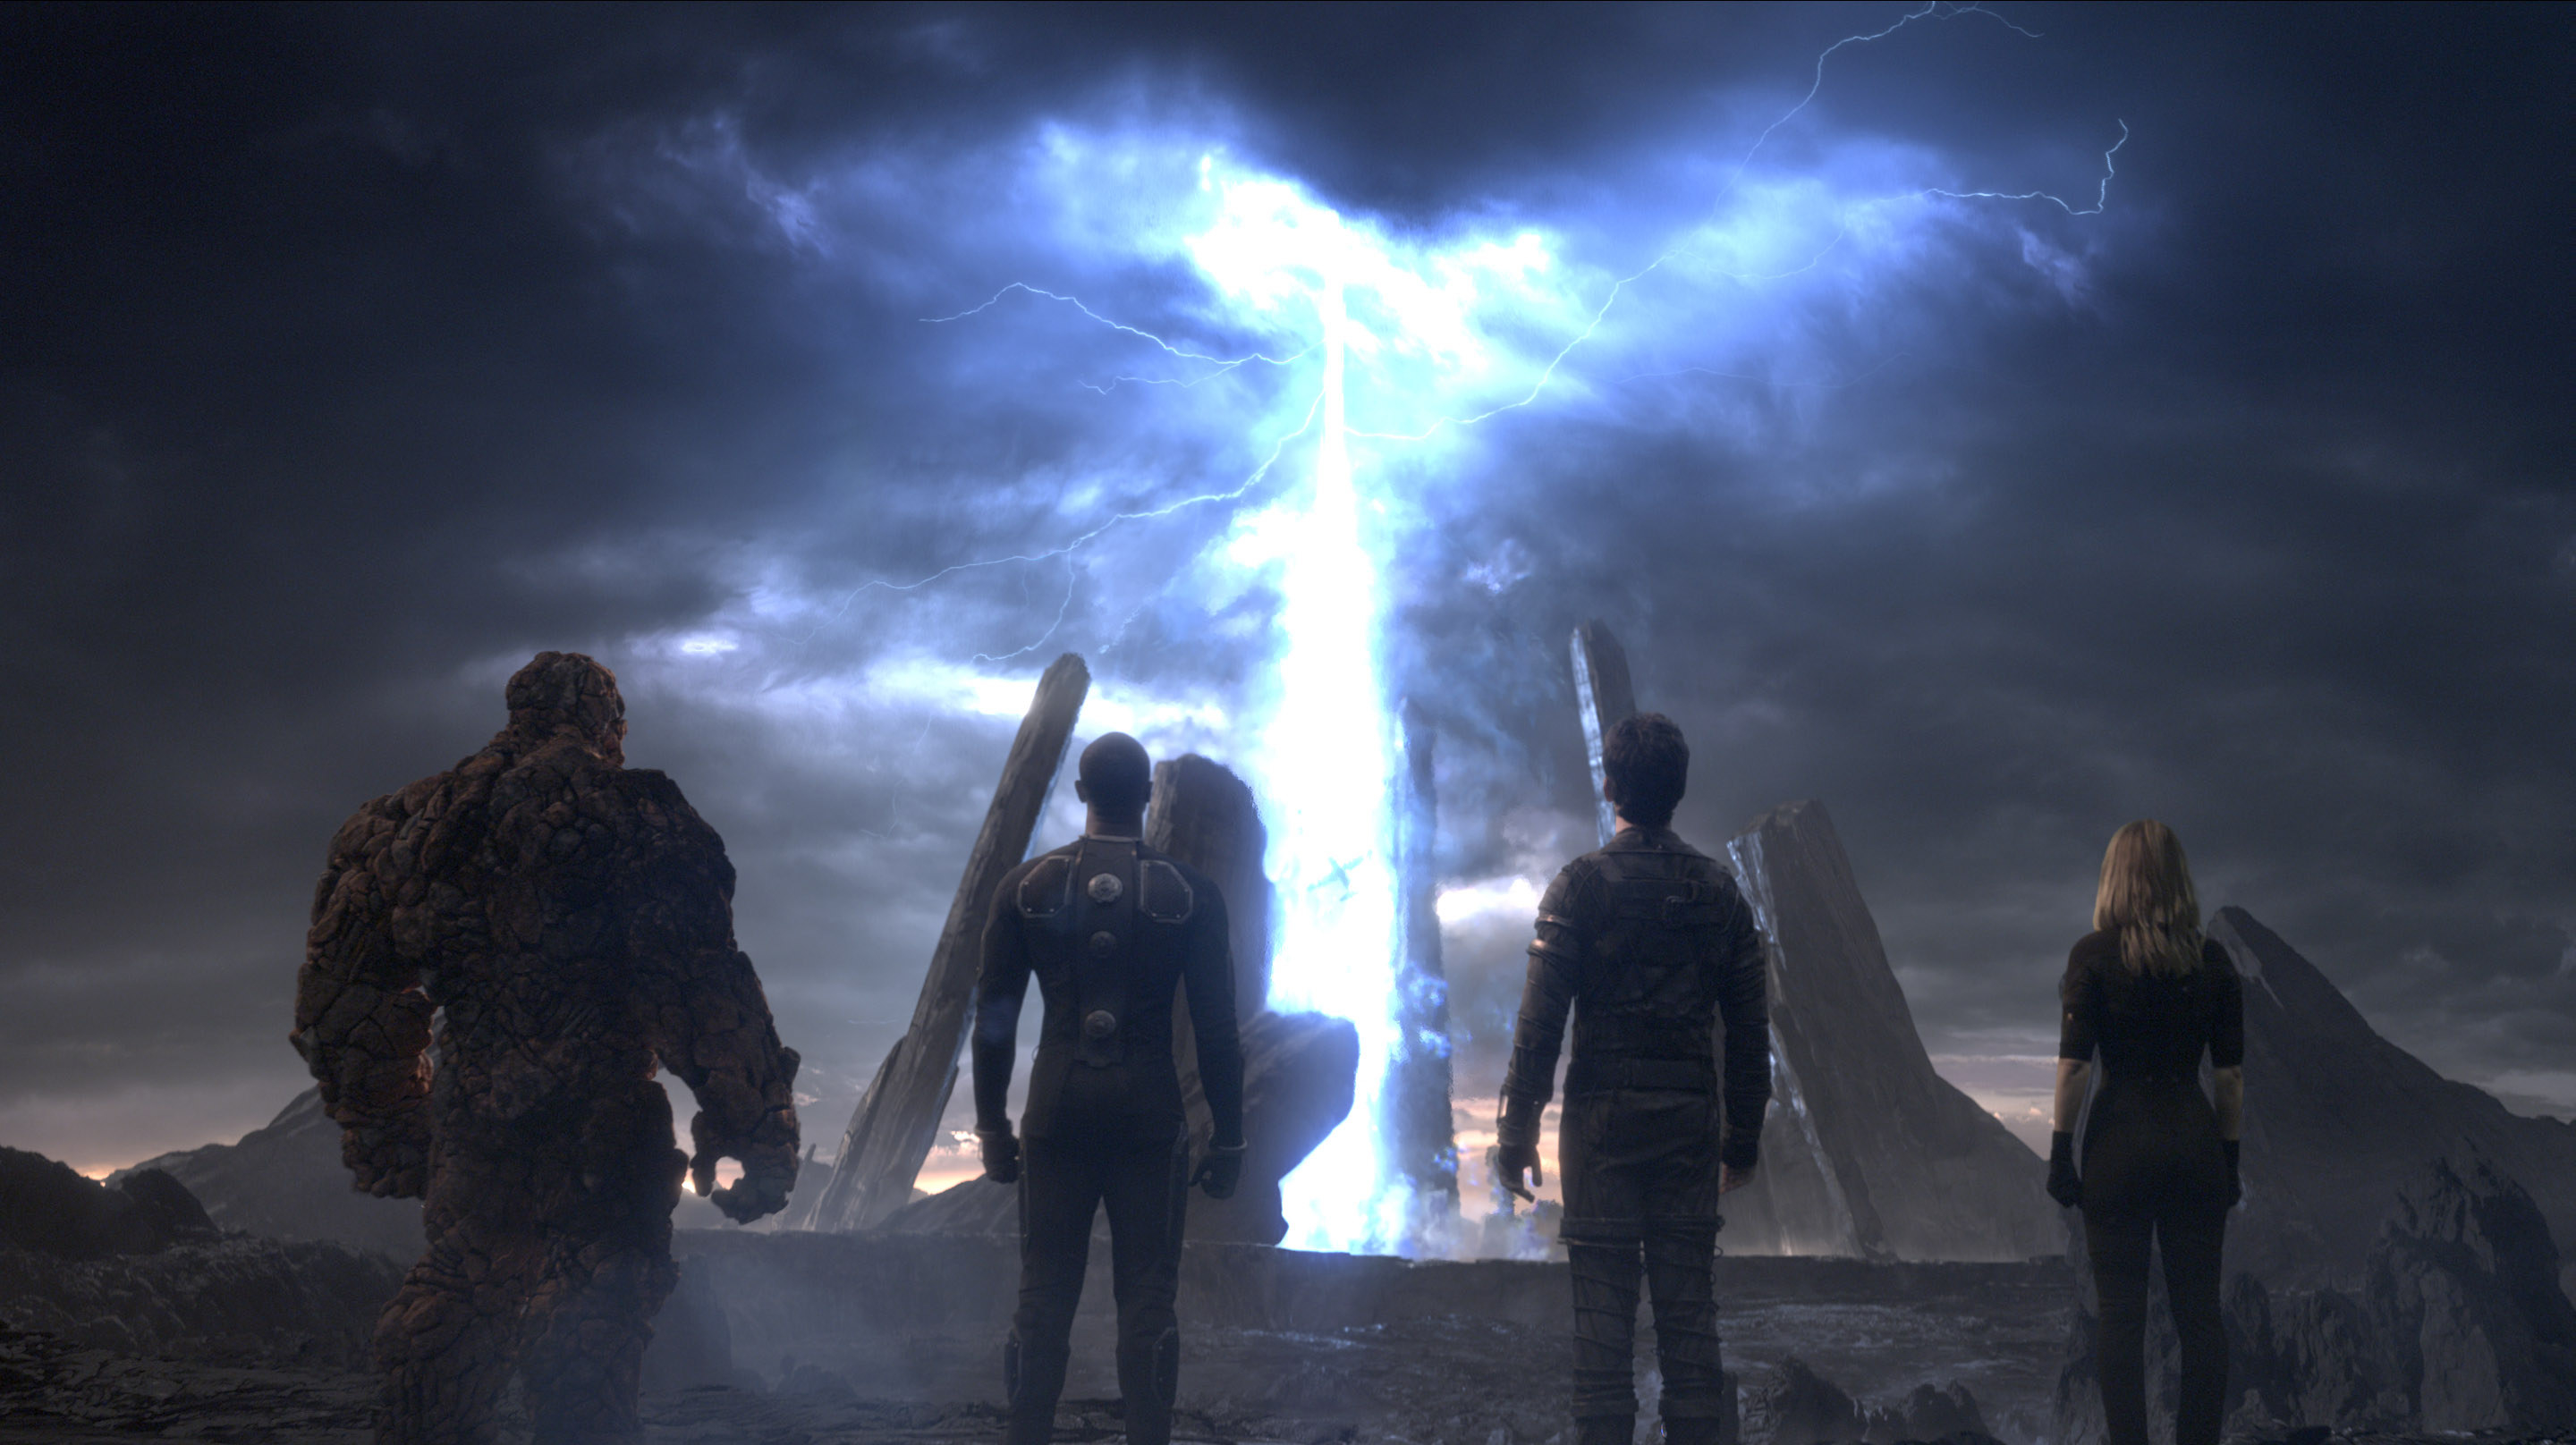 The Fantastic Four glances at an electrical surge into the sky